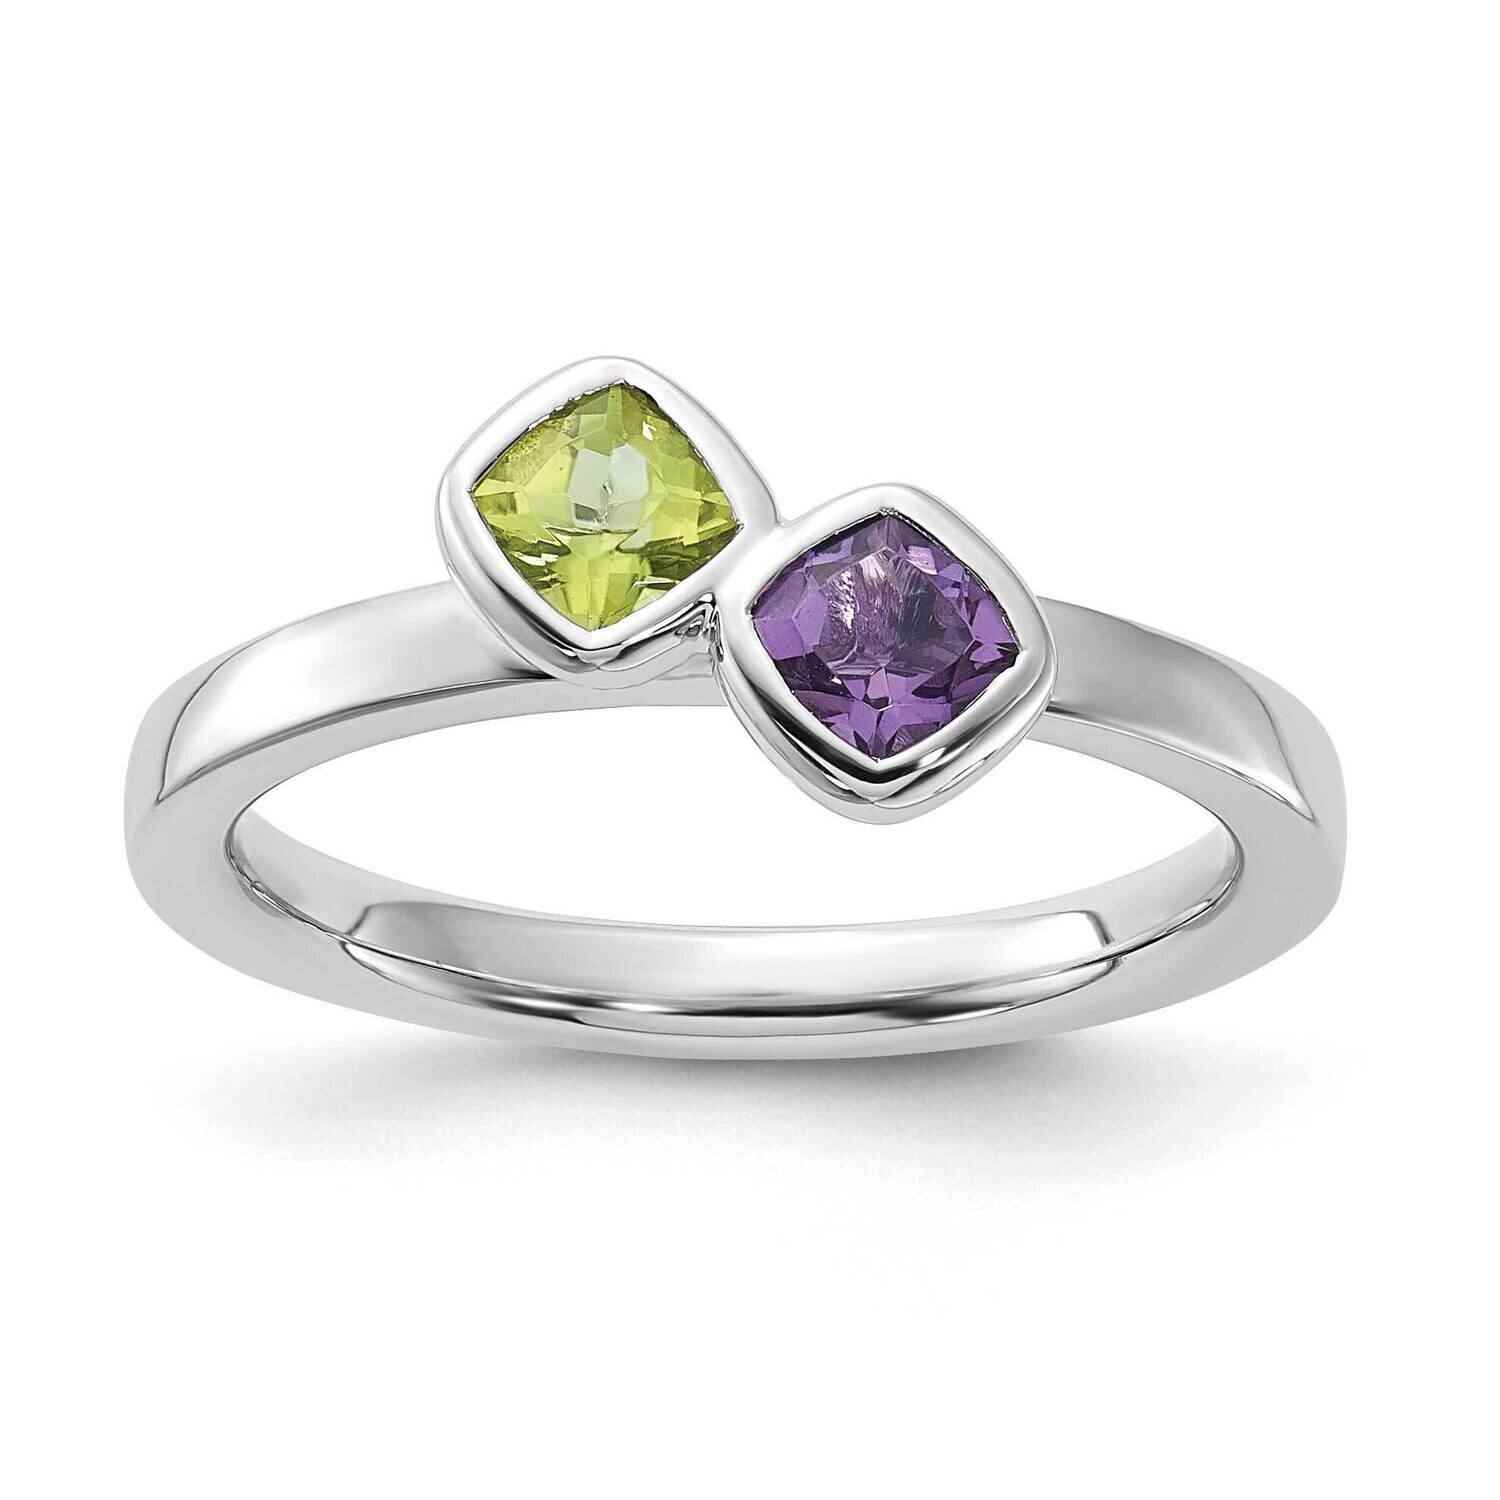 Sterling Silver Stackable Expressions Polished Amethyst & Peridot Ring QSK1469-7